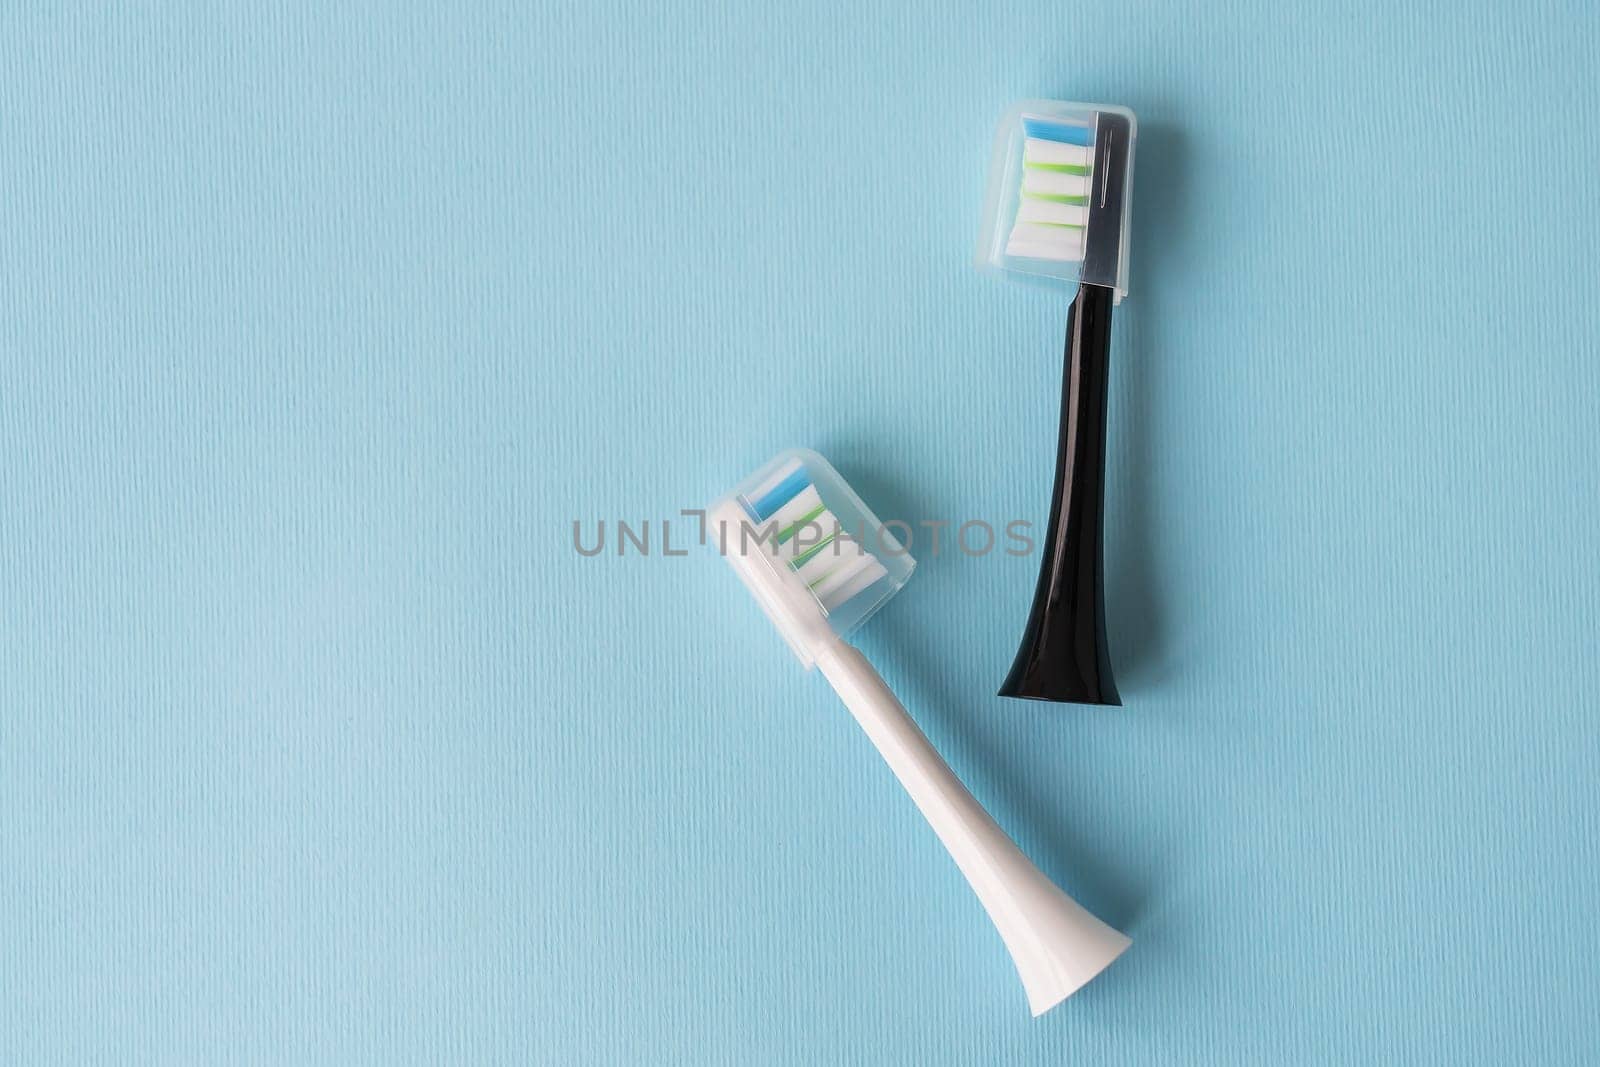 Modern electric toothbrush on a blue background. Hygiene concept for daily oral care